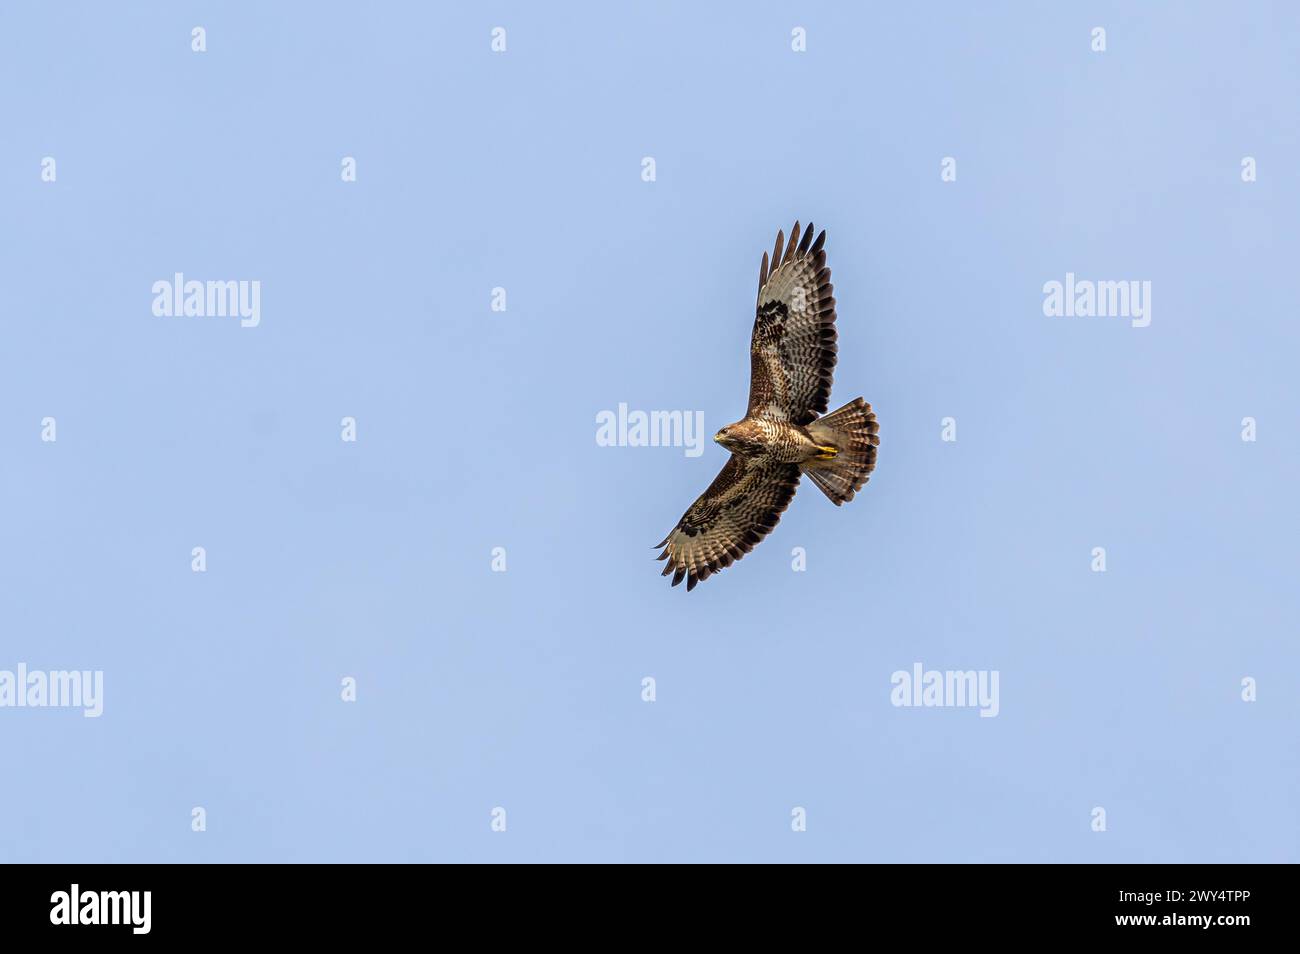 A common buzzard bird soaring gracefully with wings extended in the sky Stock Photo